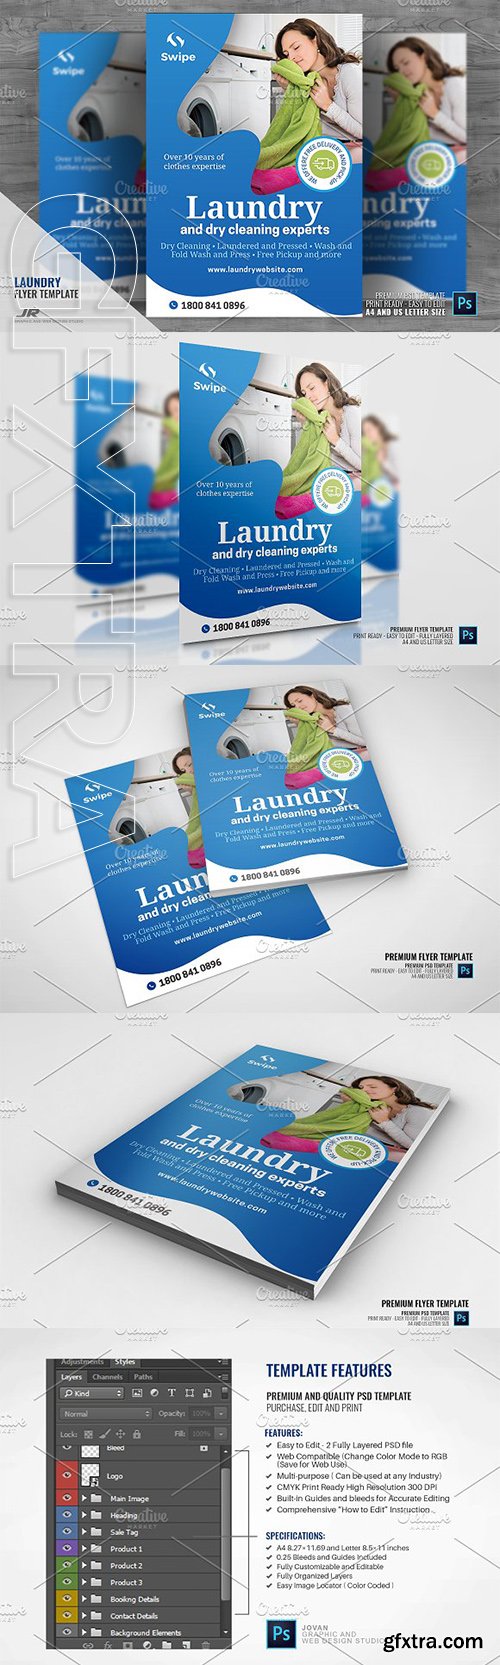 CreativeMarket - Laundry and Dry Cleaning Services 2945867